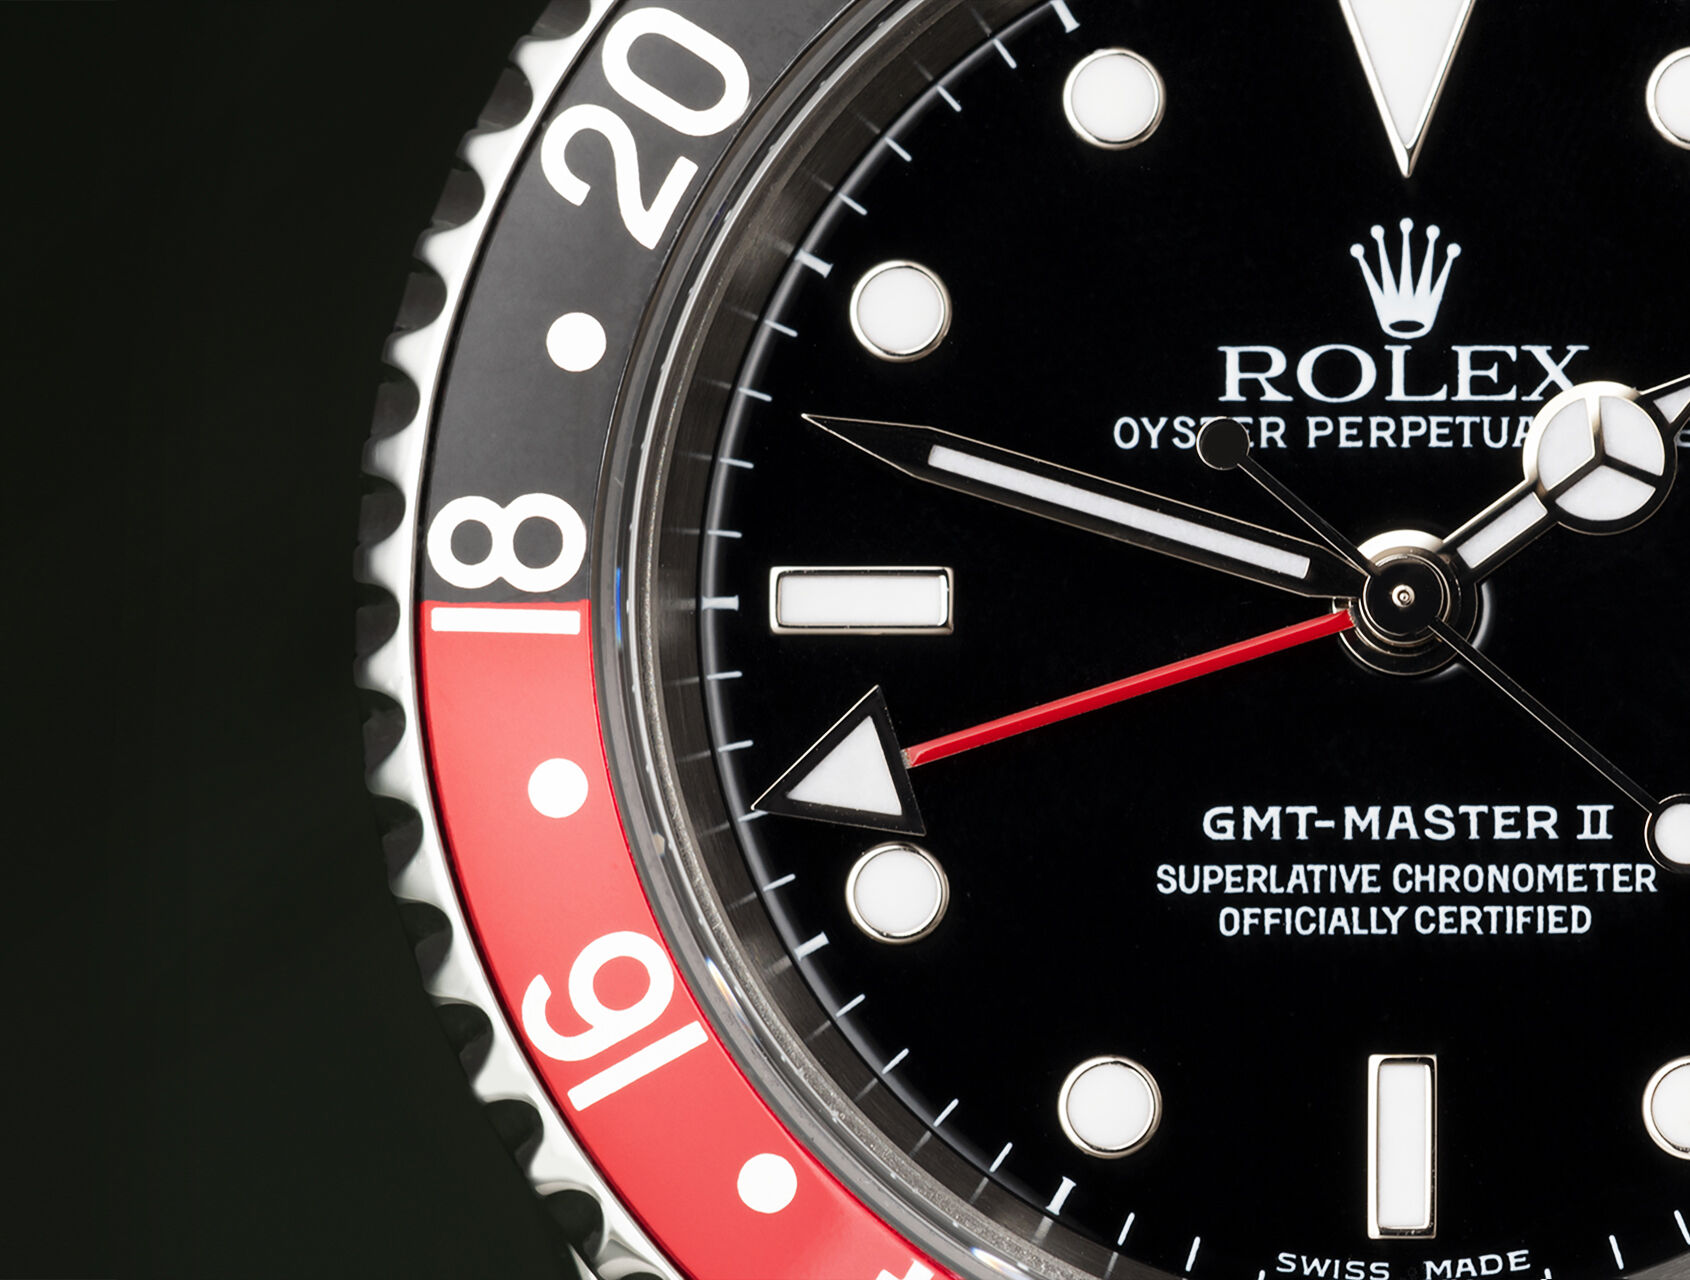 ref 16710 | 16710 - Box & Papers | Rolex GMT-Master II